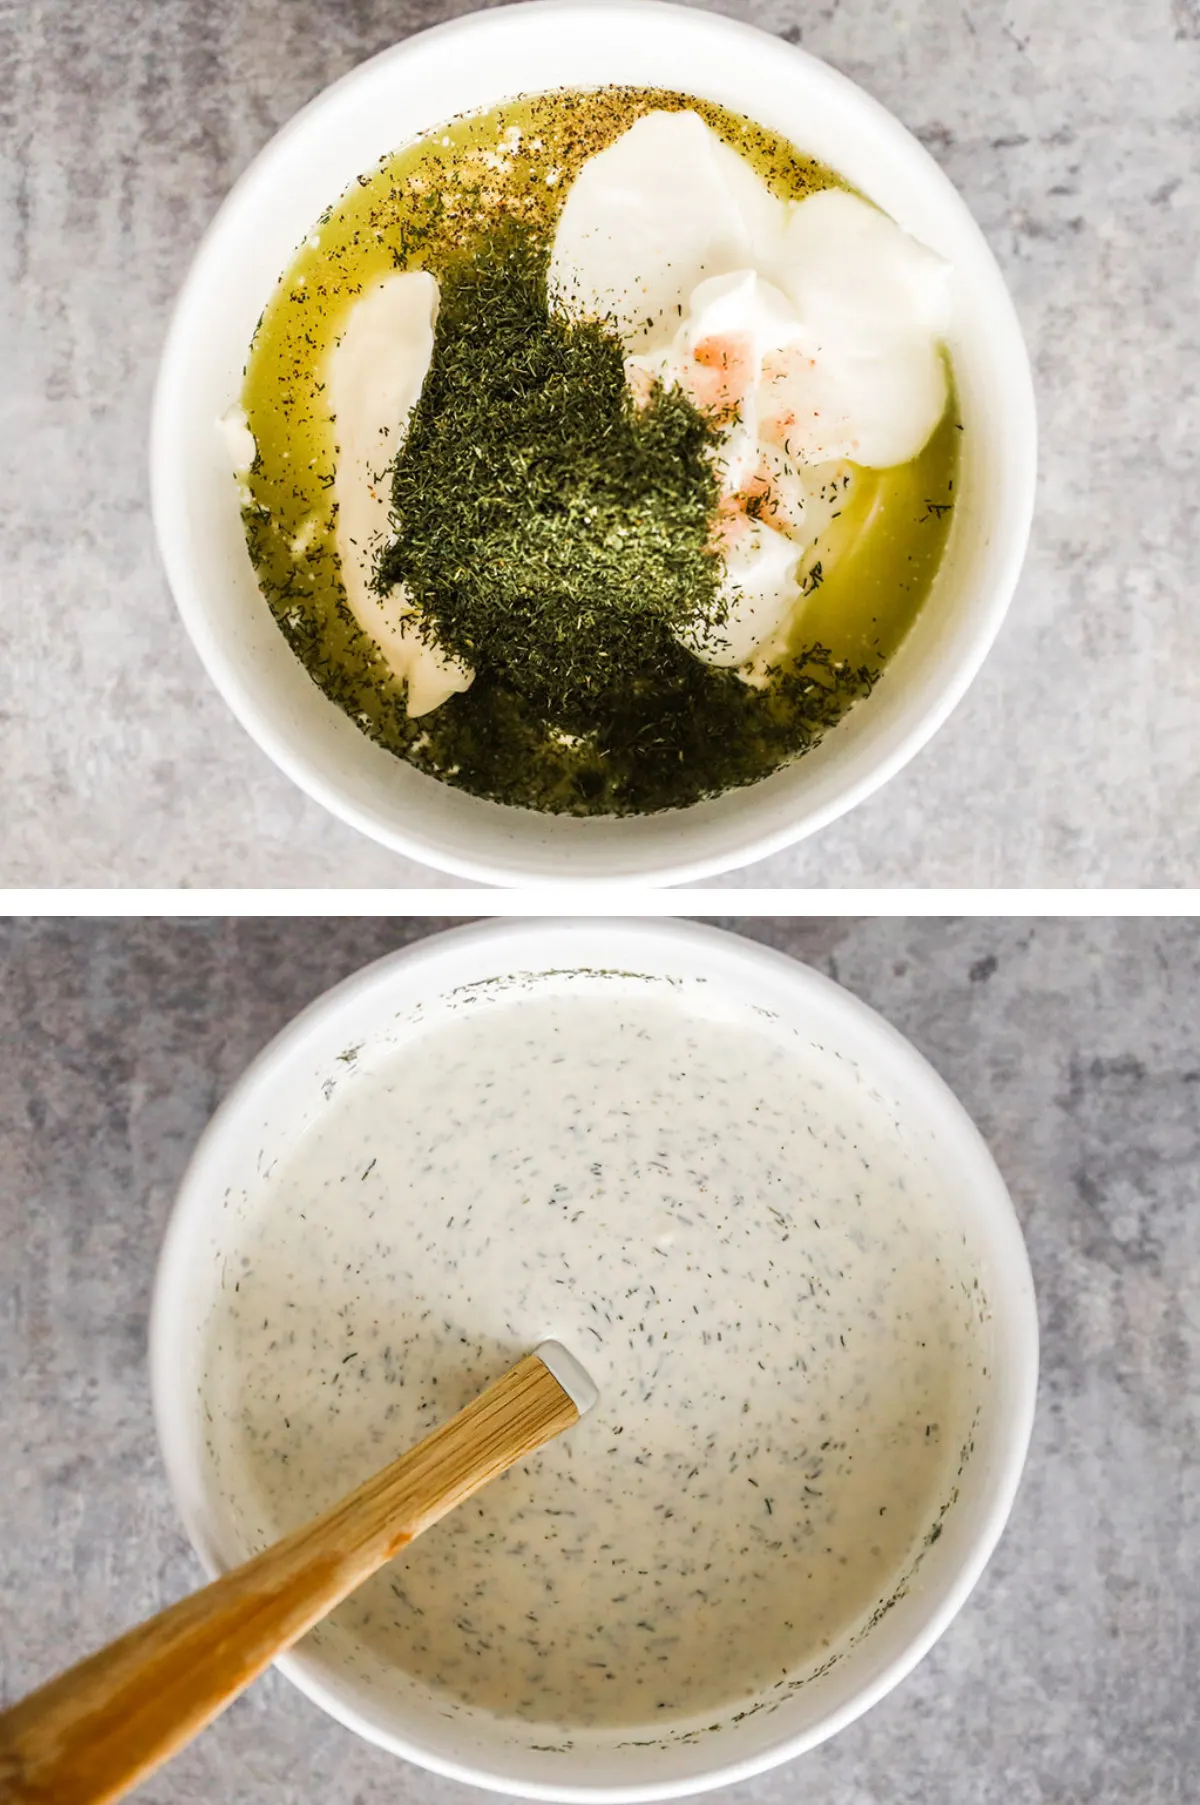 Two overhead images in one: 1. All the dressing ingredients added to a bowl. 2. All the dressing ingredients mixed together. 